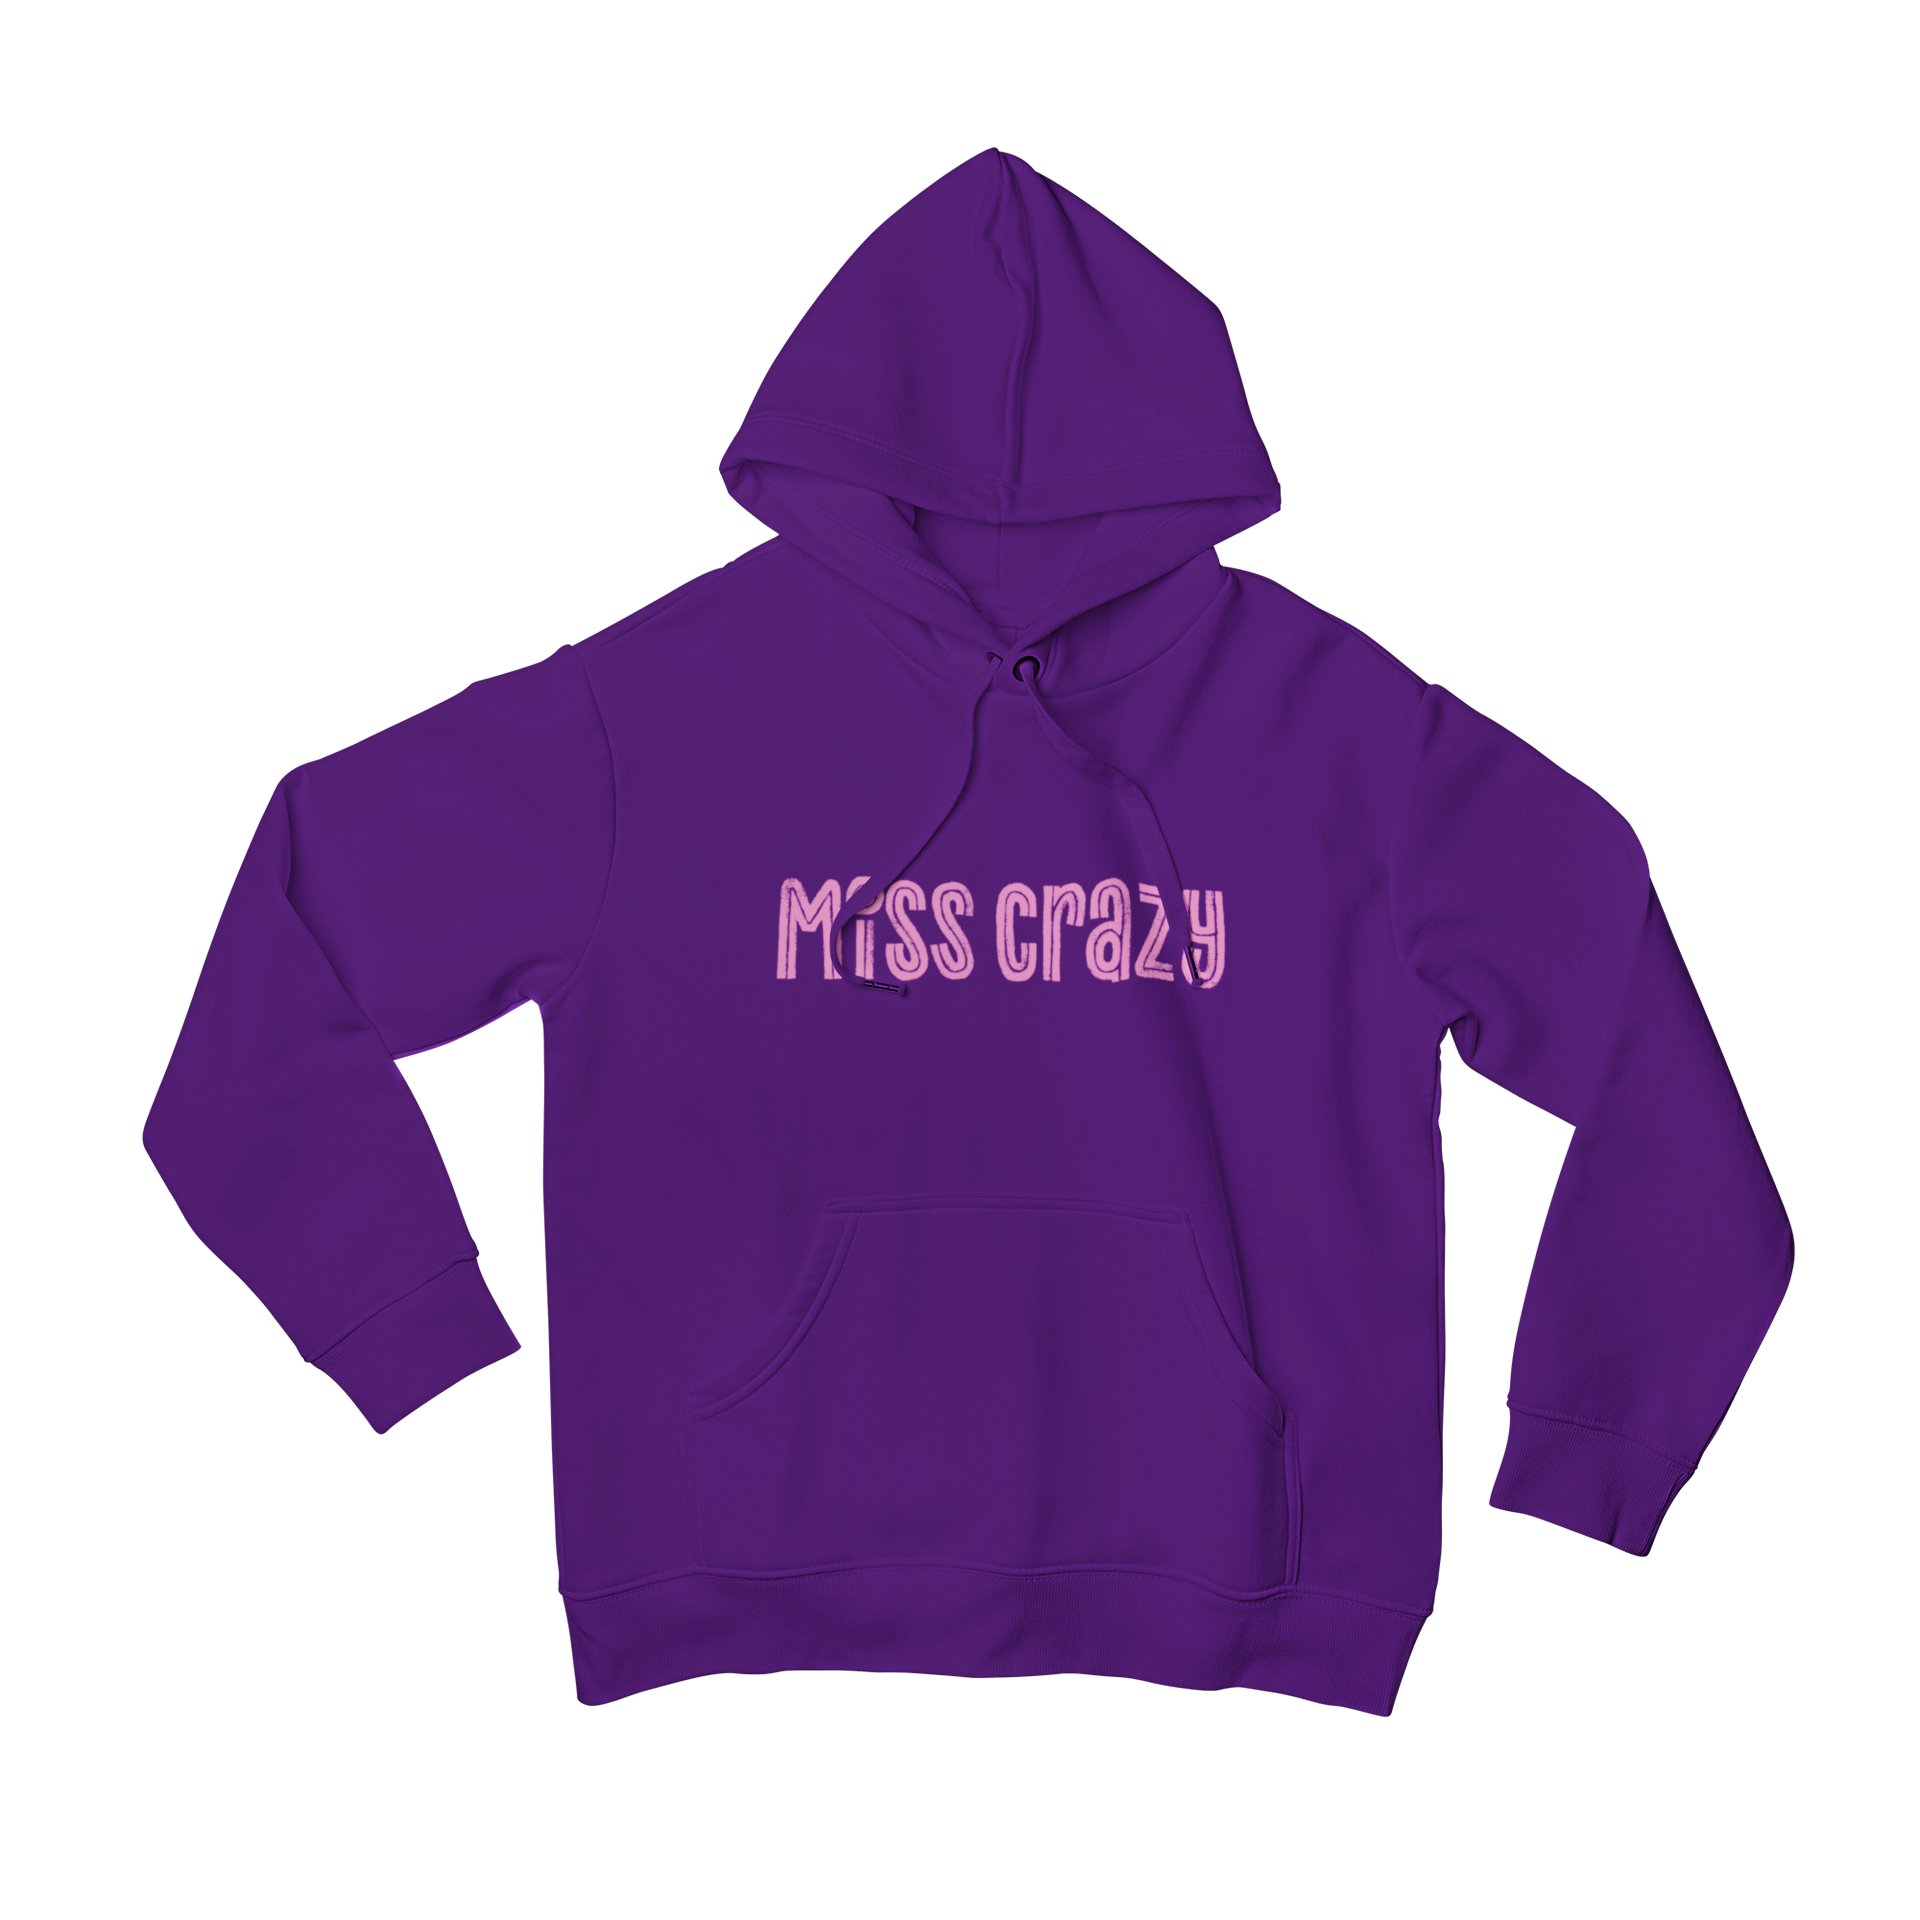 Elevate your wardrobe with our Miss Crazy Hoodie. Made with a matching slogan design, this hoodie is the perfect companion to our Mr Lazy Hoodie. Add some playful style to your outfits with this must-have piece.